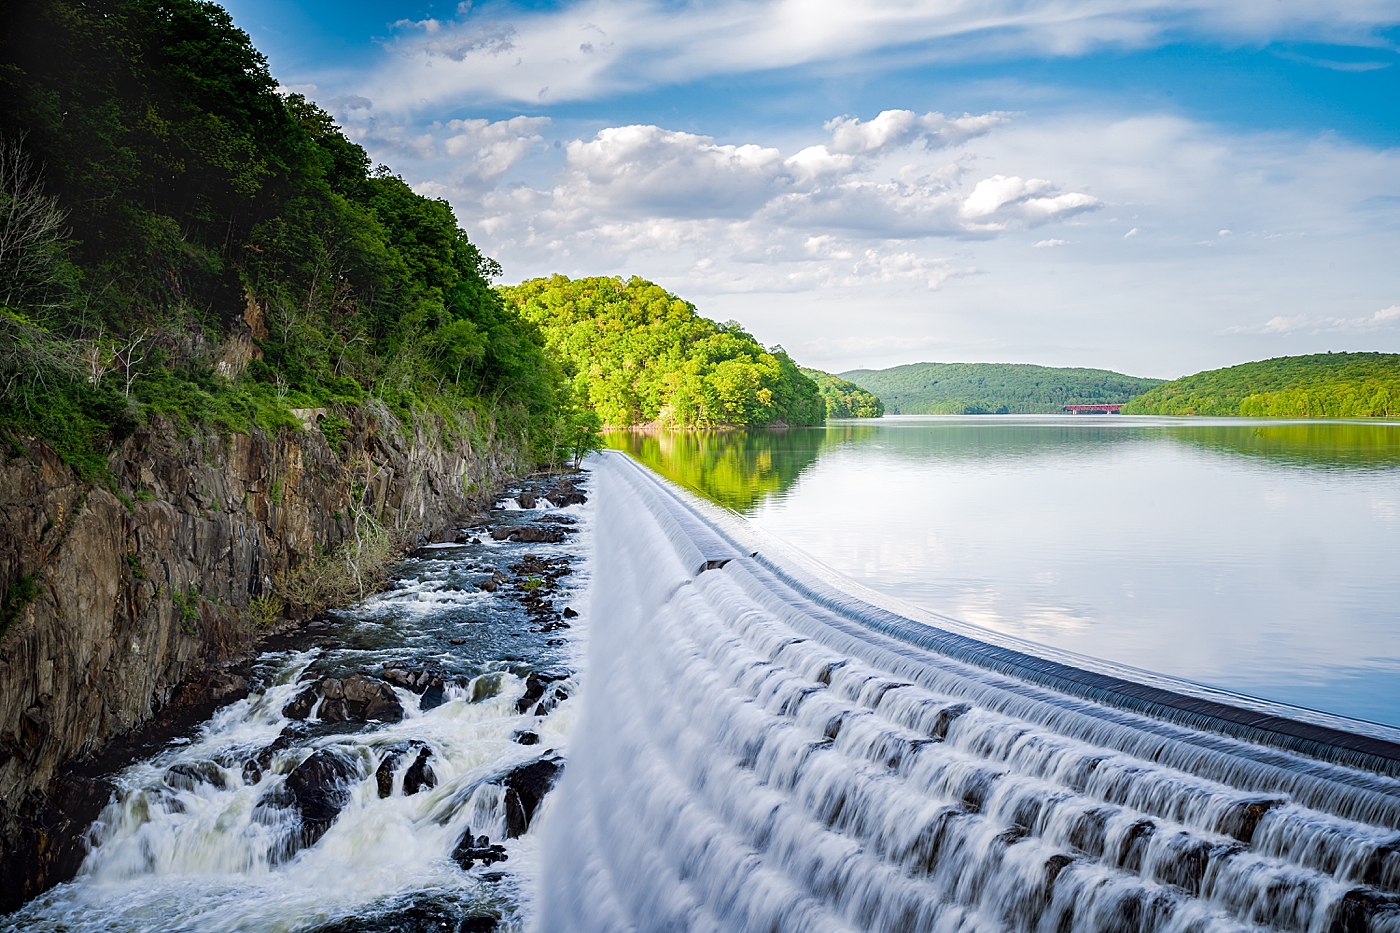 Water rushing over the Croton Gorge Dam in Croton Gorge Park.